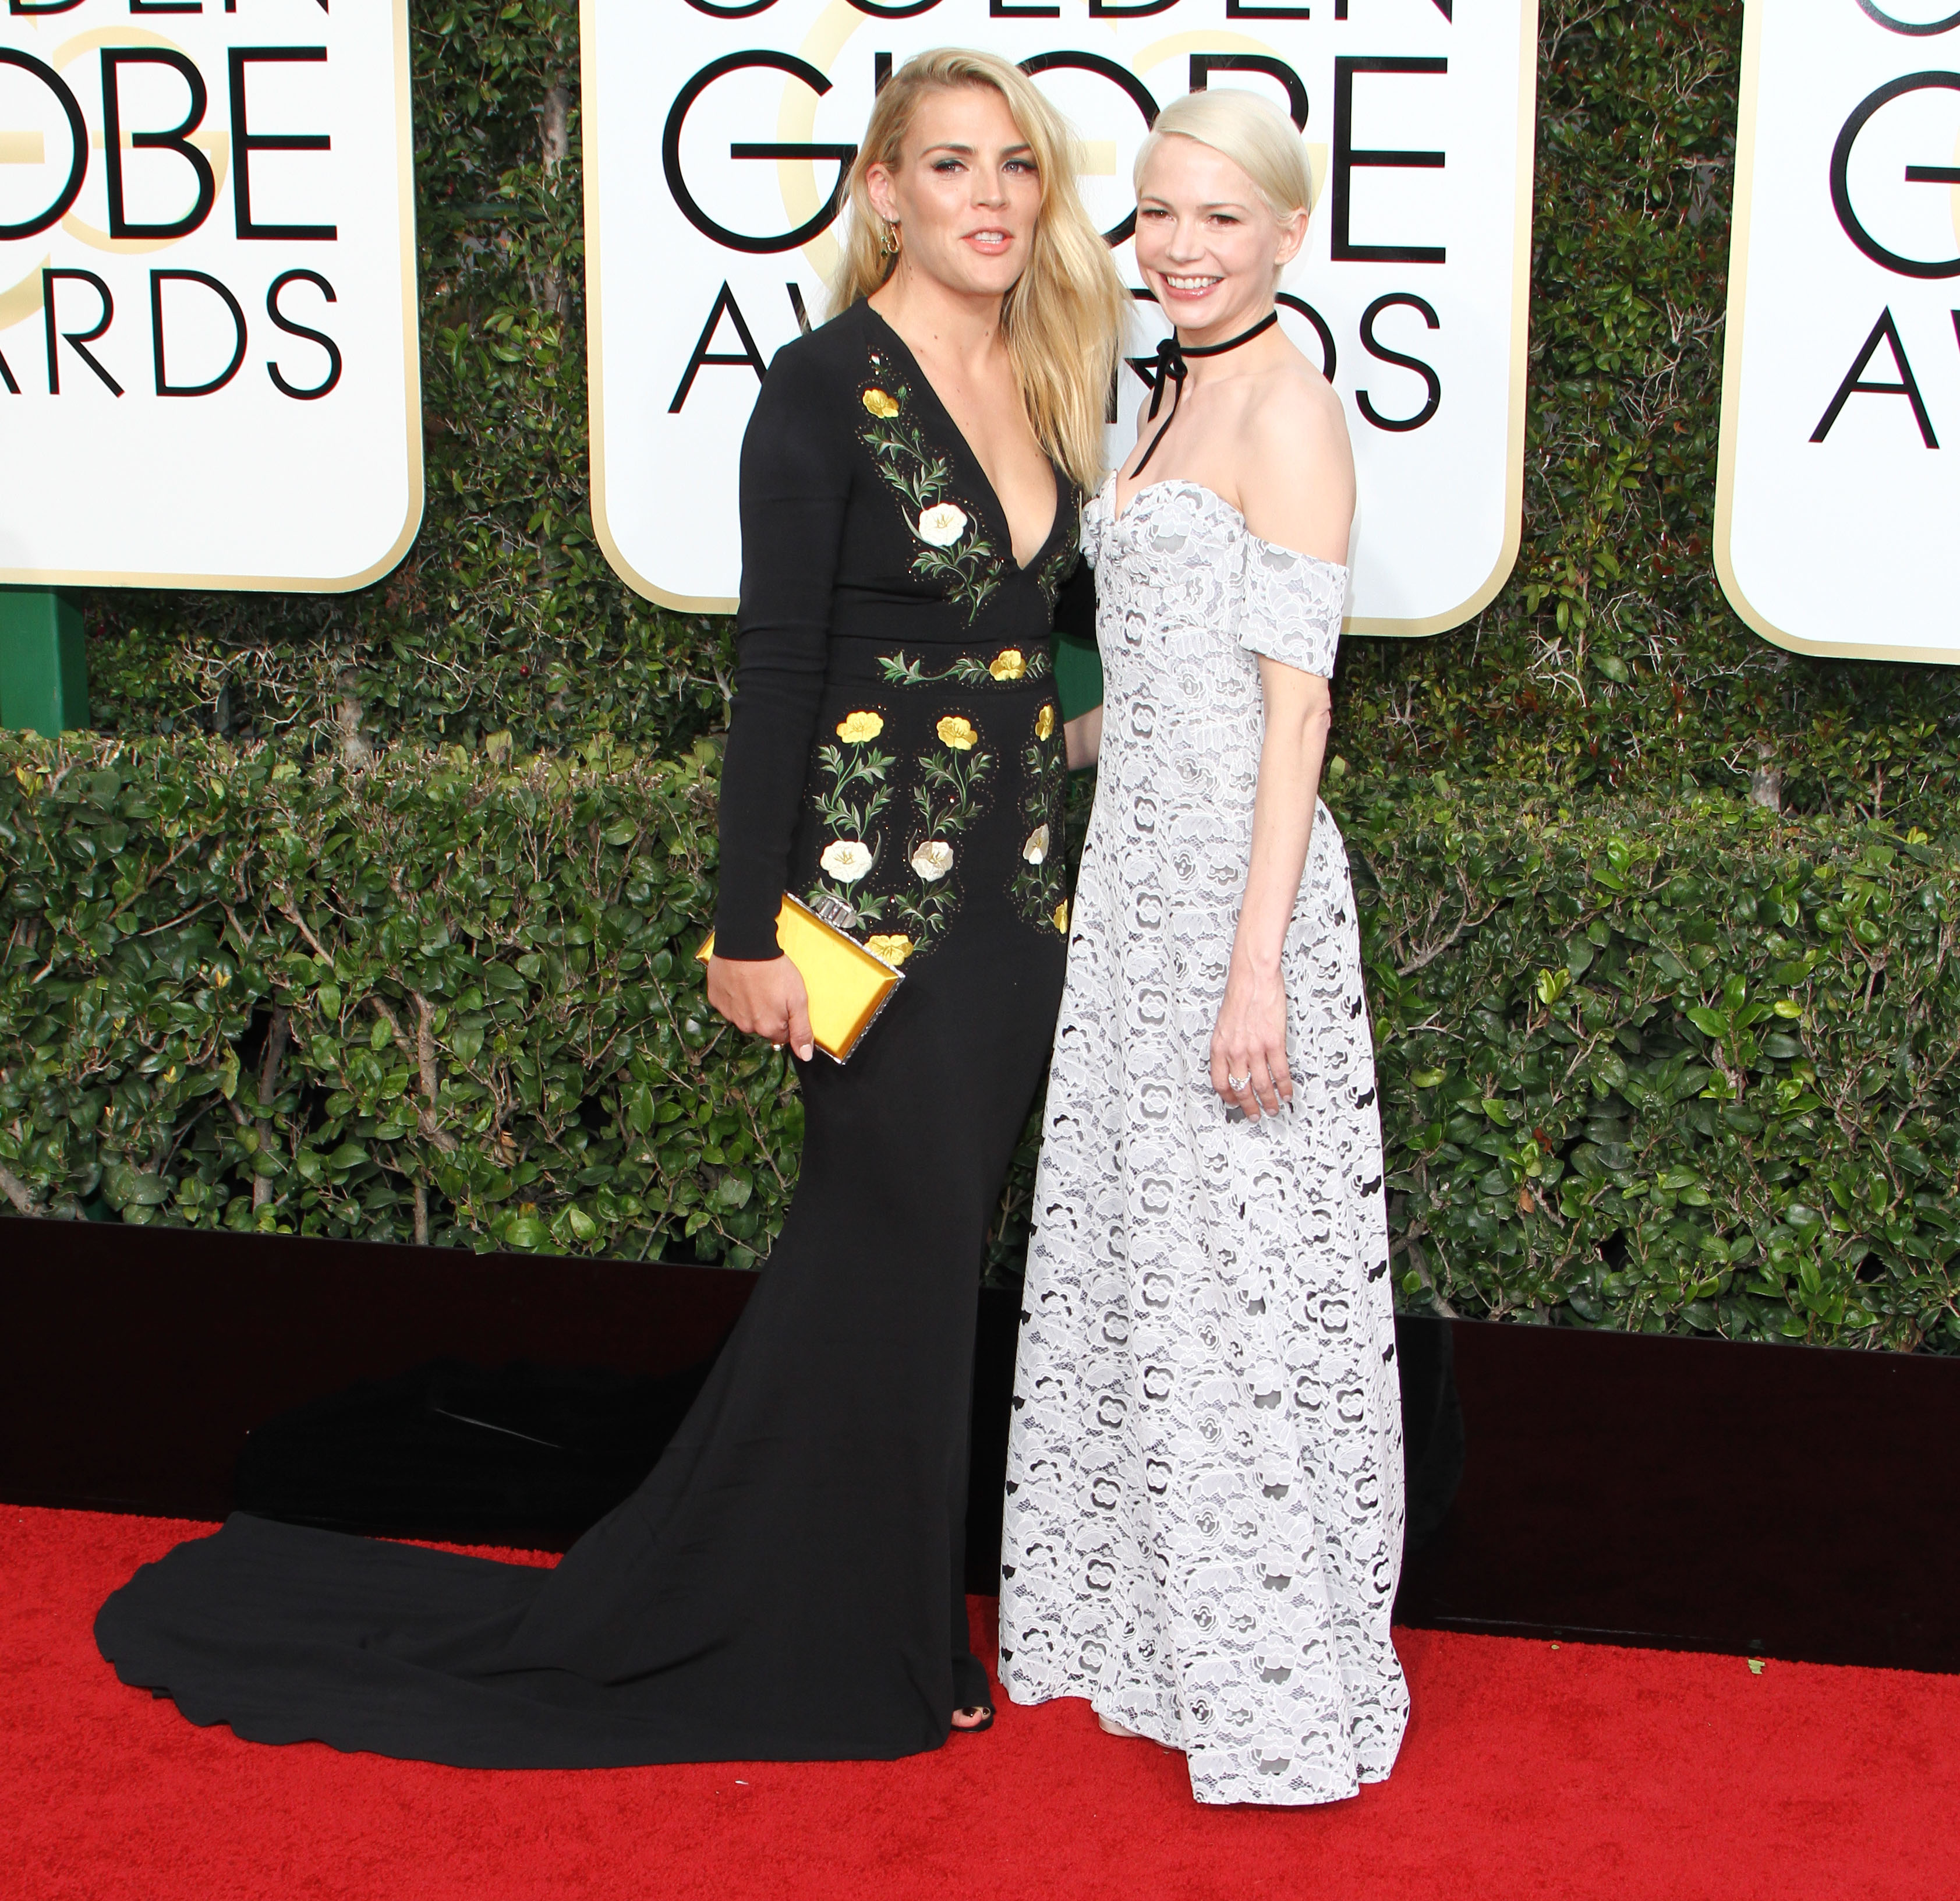 Busy Philipps in Stella McCartney, Michelle Williams in Louis Vuitton at the Golden Globes